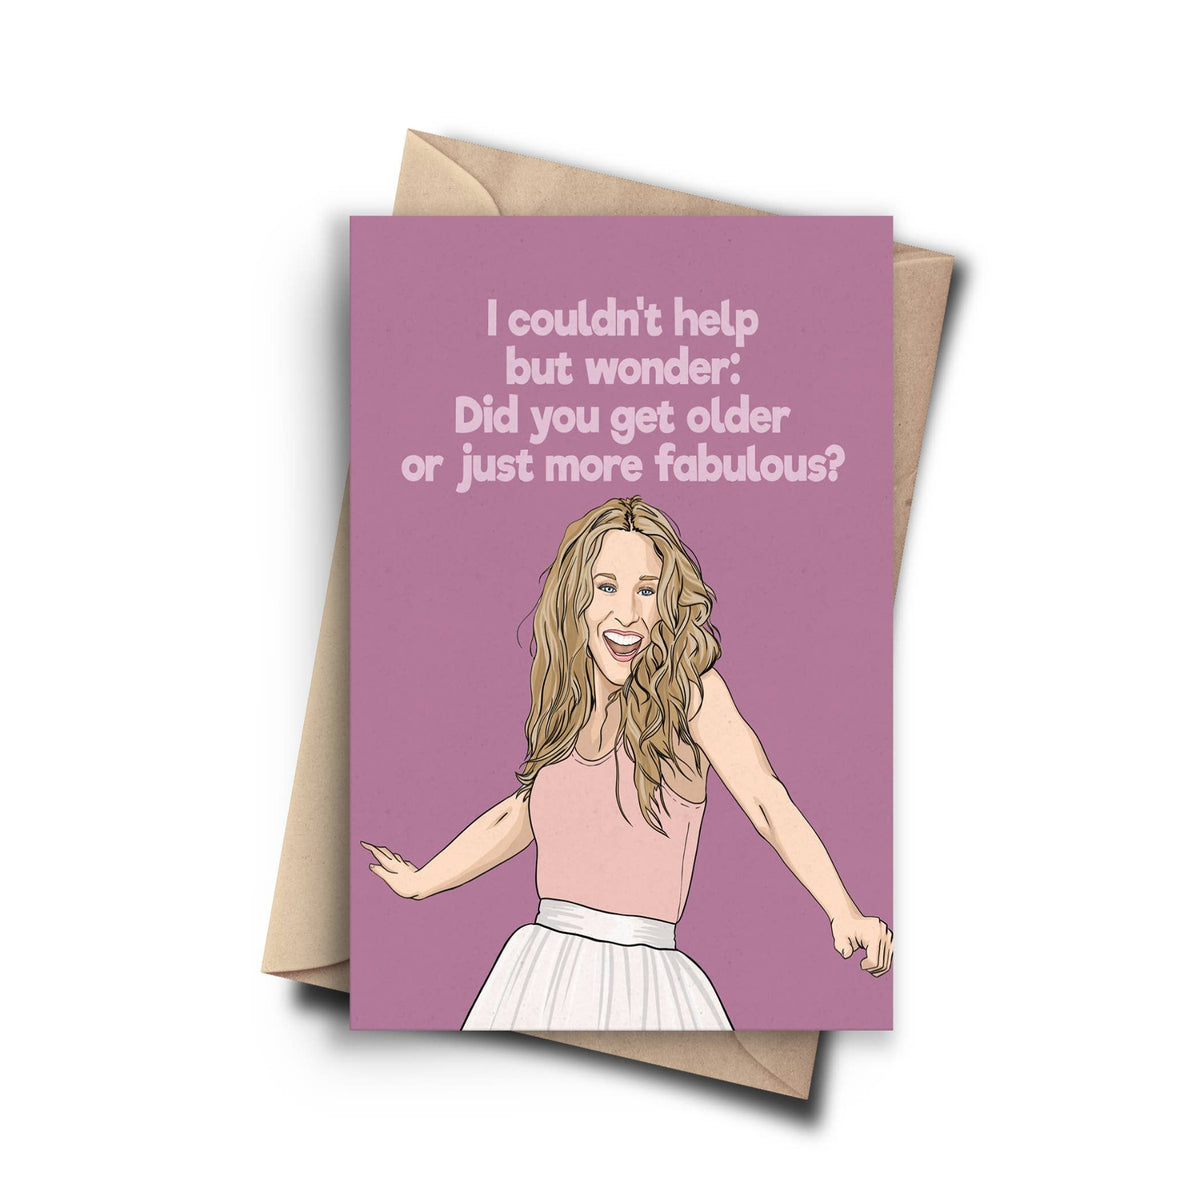 Sex and the City Carrie Bradshaw Funny Birthday Card